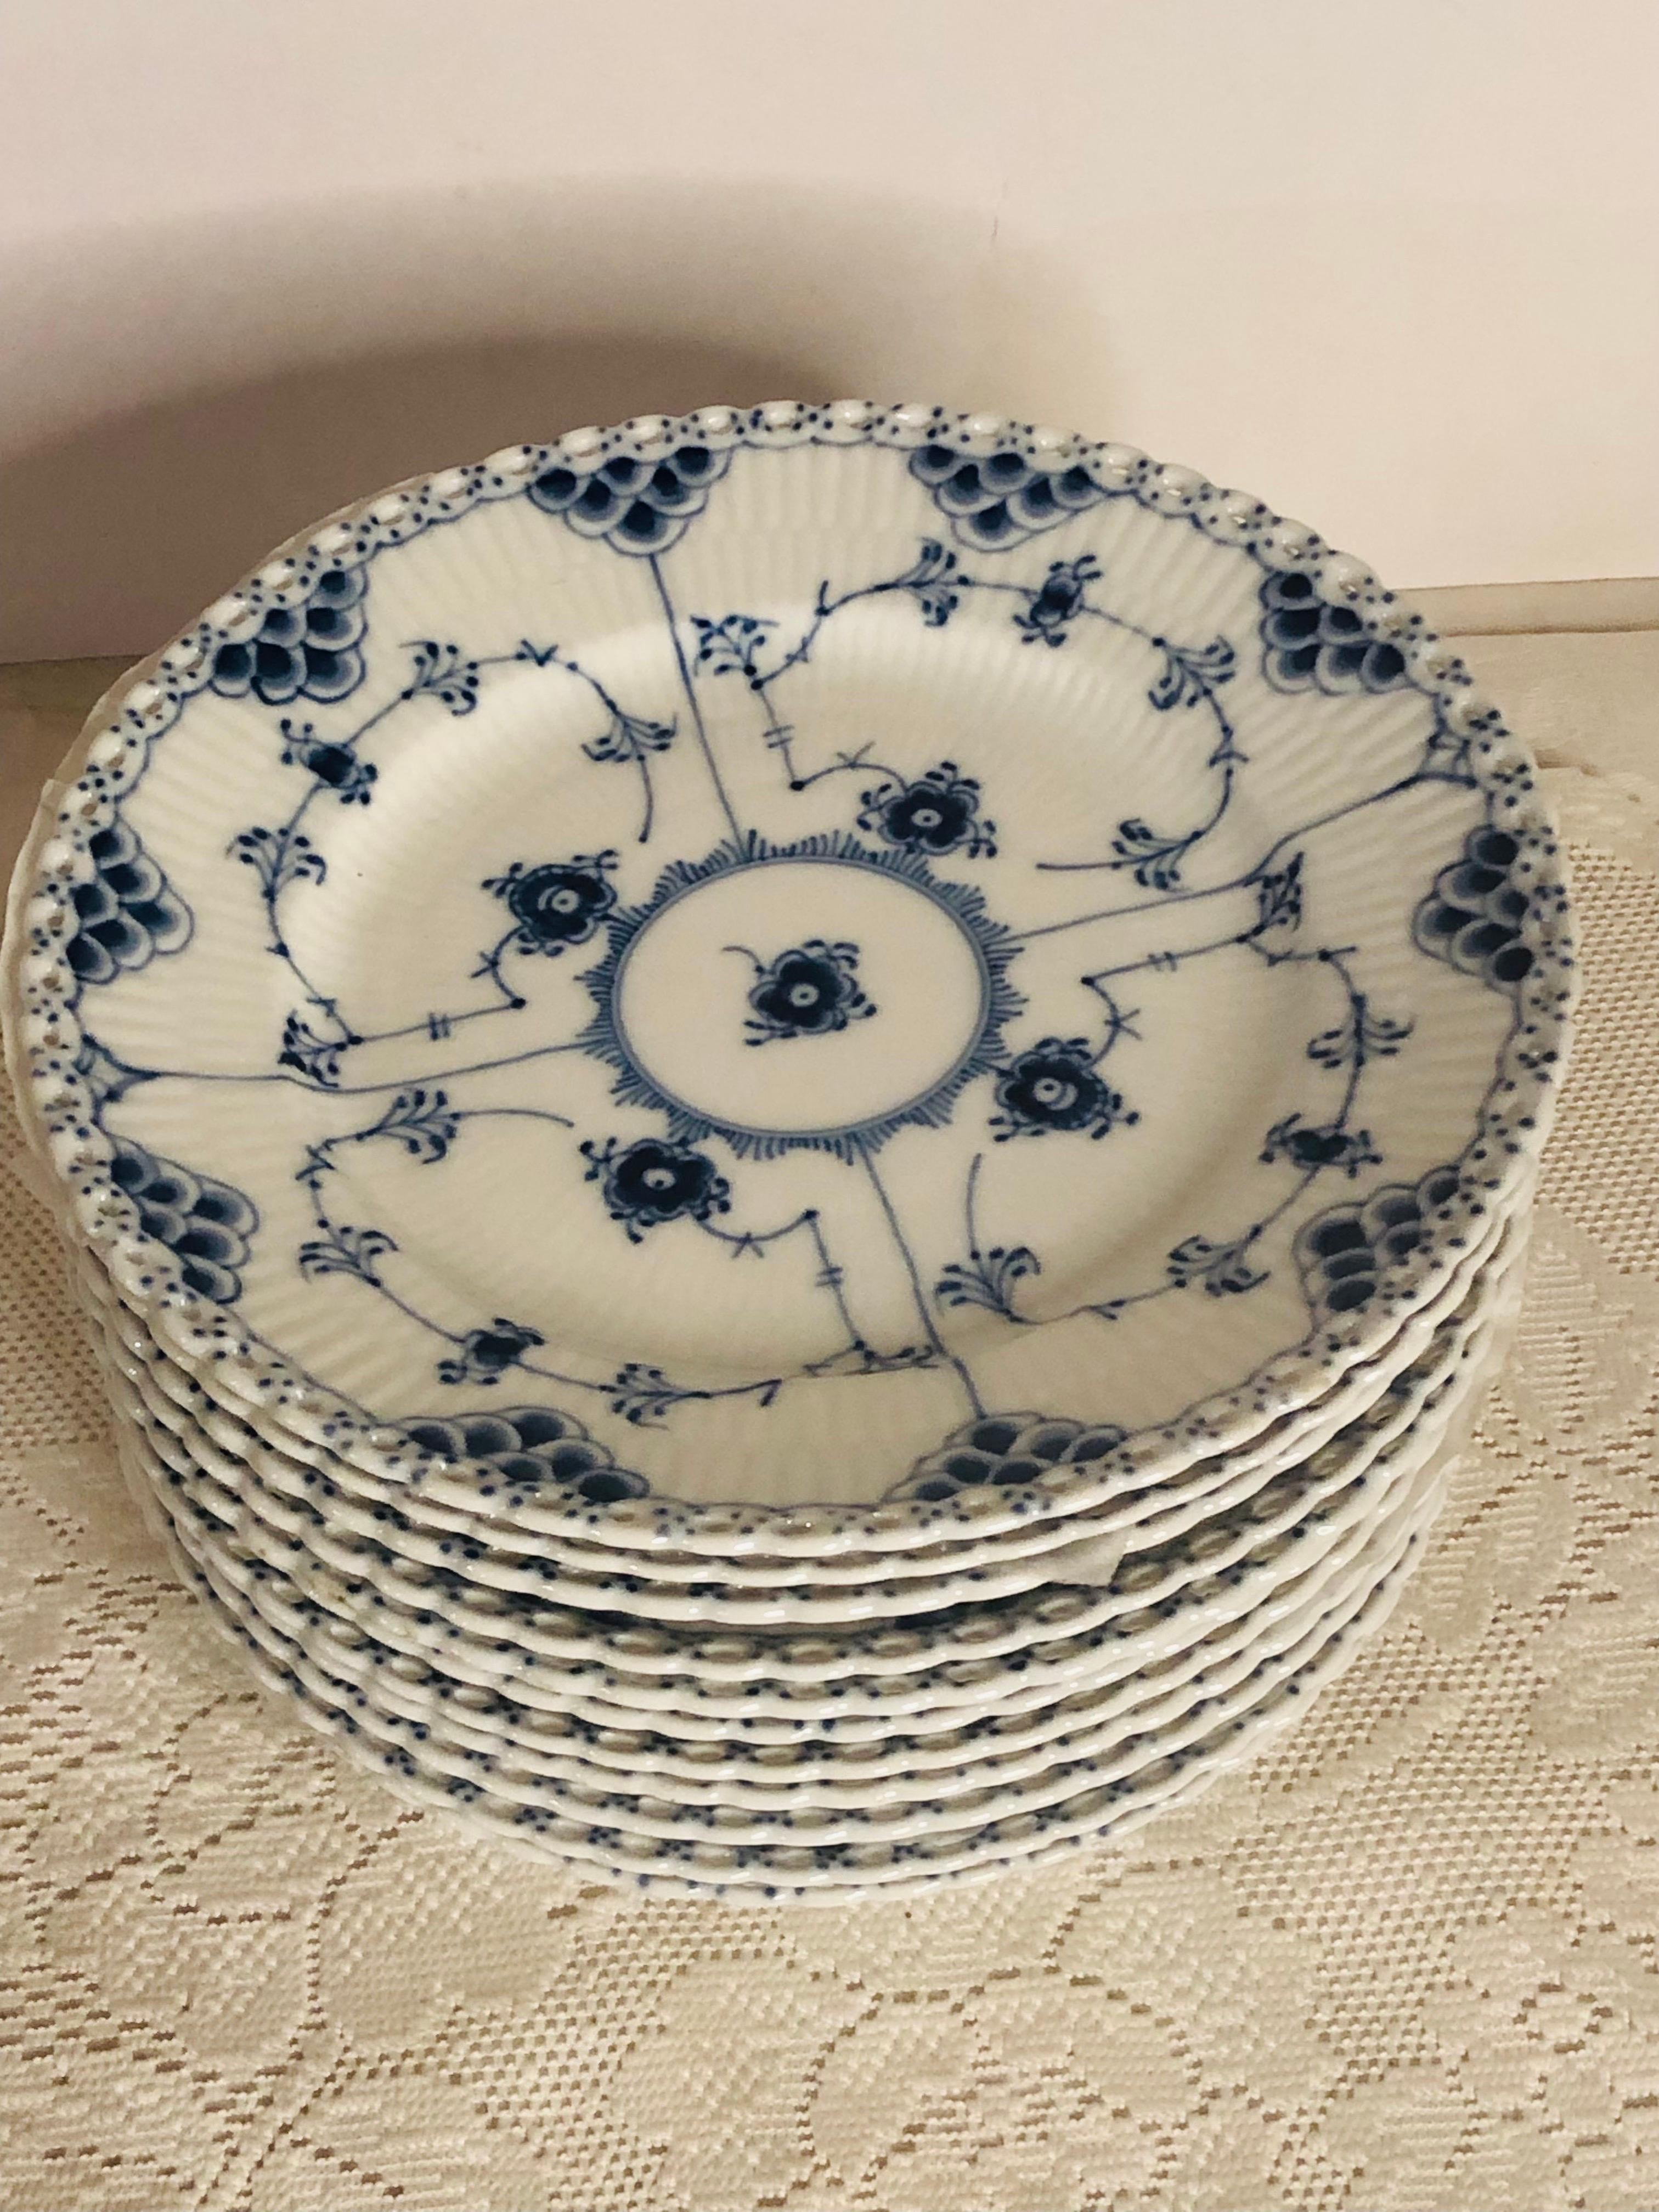 I want to offer you this fabulous set of eleven Royal Copenhagen fluted luncheon or dessert plates with full lace openwork design on the borders. This full lace fluted dinnerware was the first dinner service sold by Royal Copenhagen in 1775. In